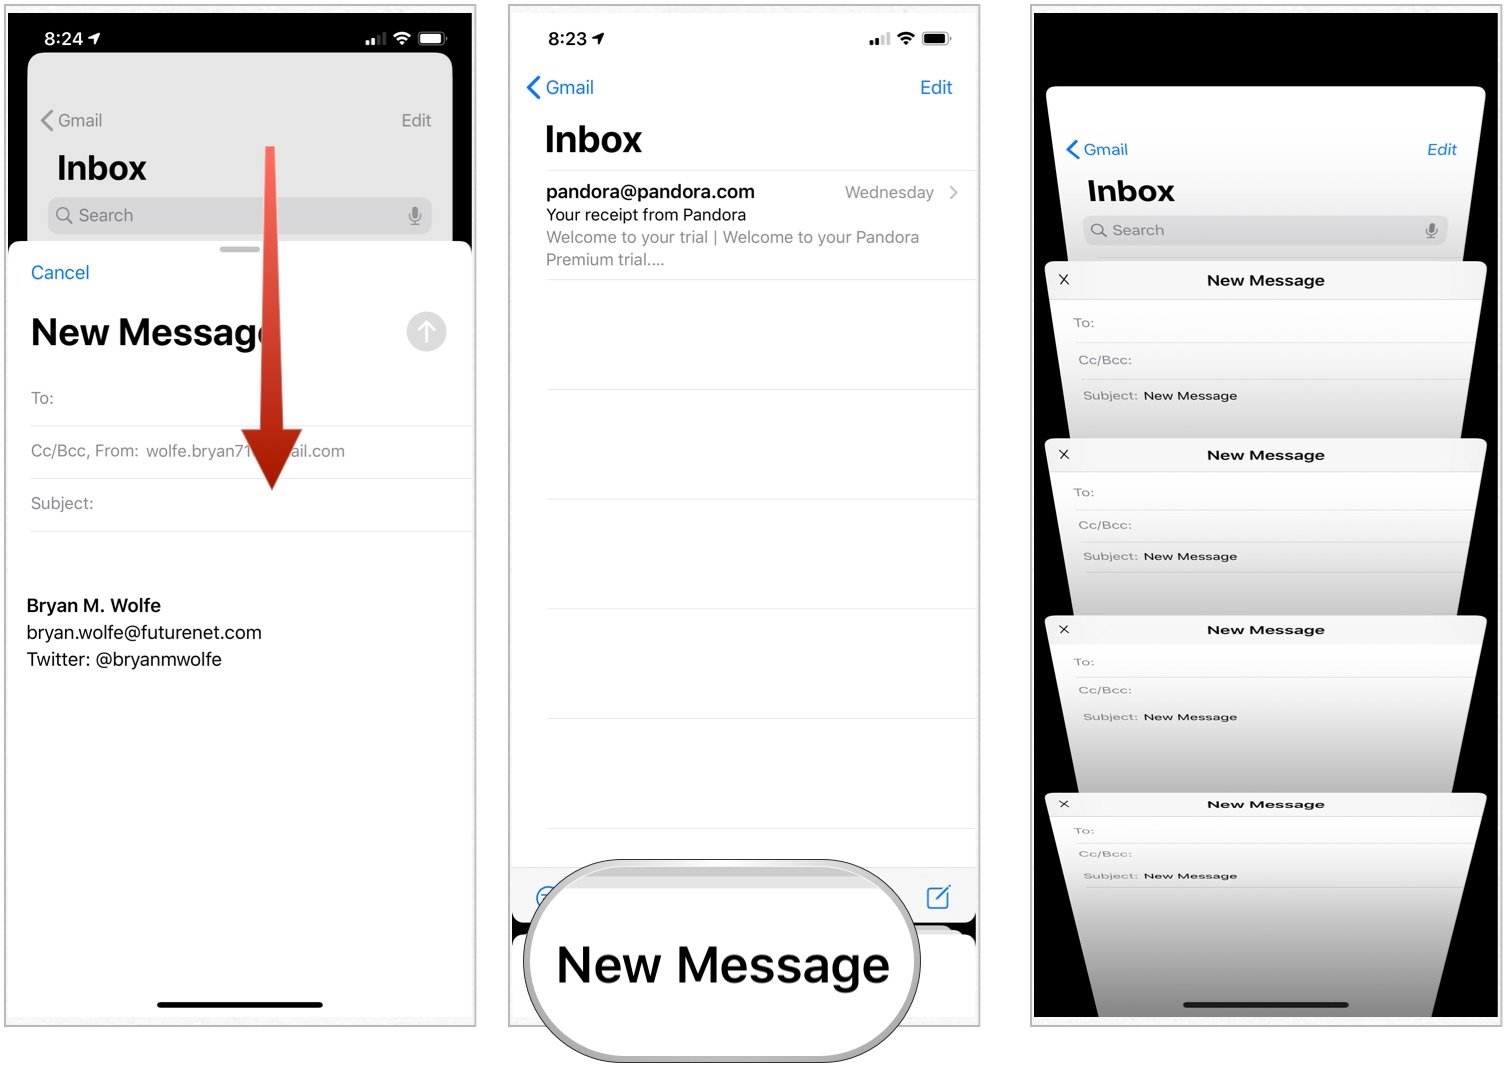 How To Send A New Email With IPhone Mail App